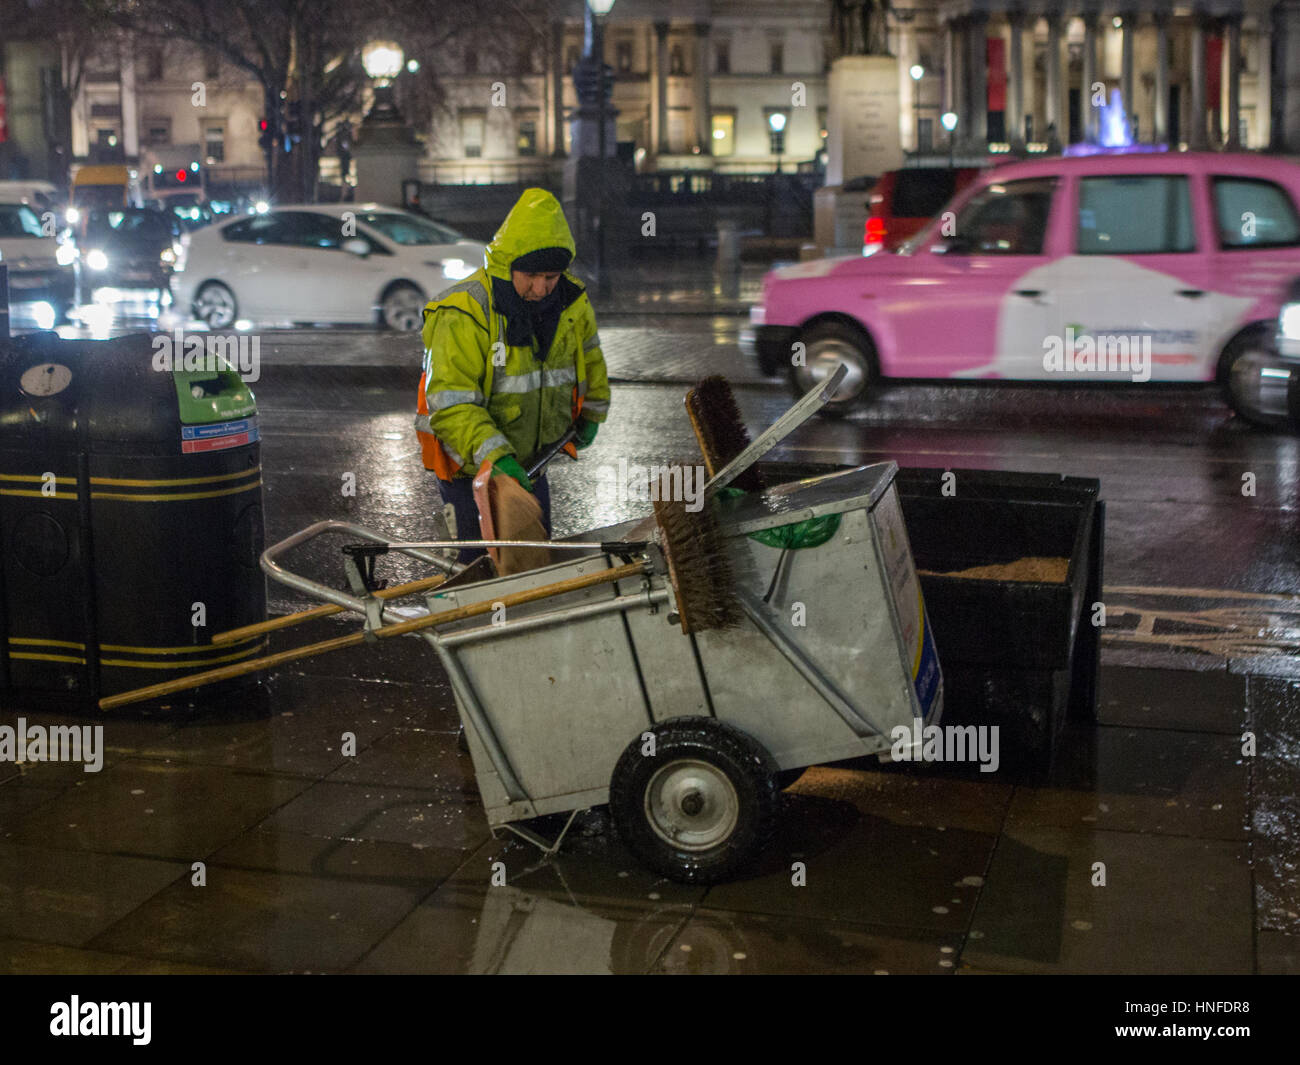 Westminster Council worker gritting pavement ahead of expected cold snap  Featuring: Atmosphere, View Where: London, United Kingdom When: 12 Jan 2017 Credit: Wheatley/WENN Stock Photo